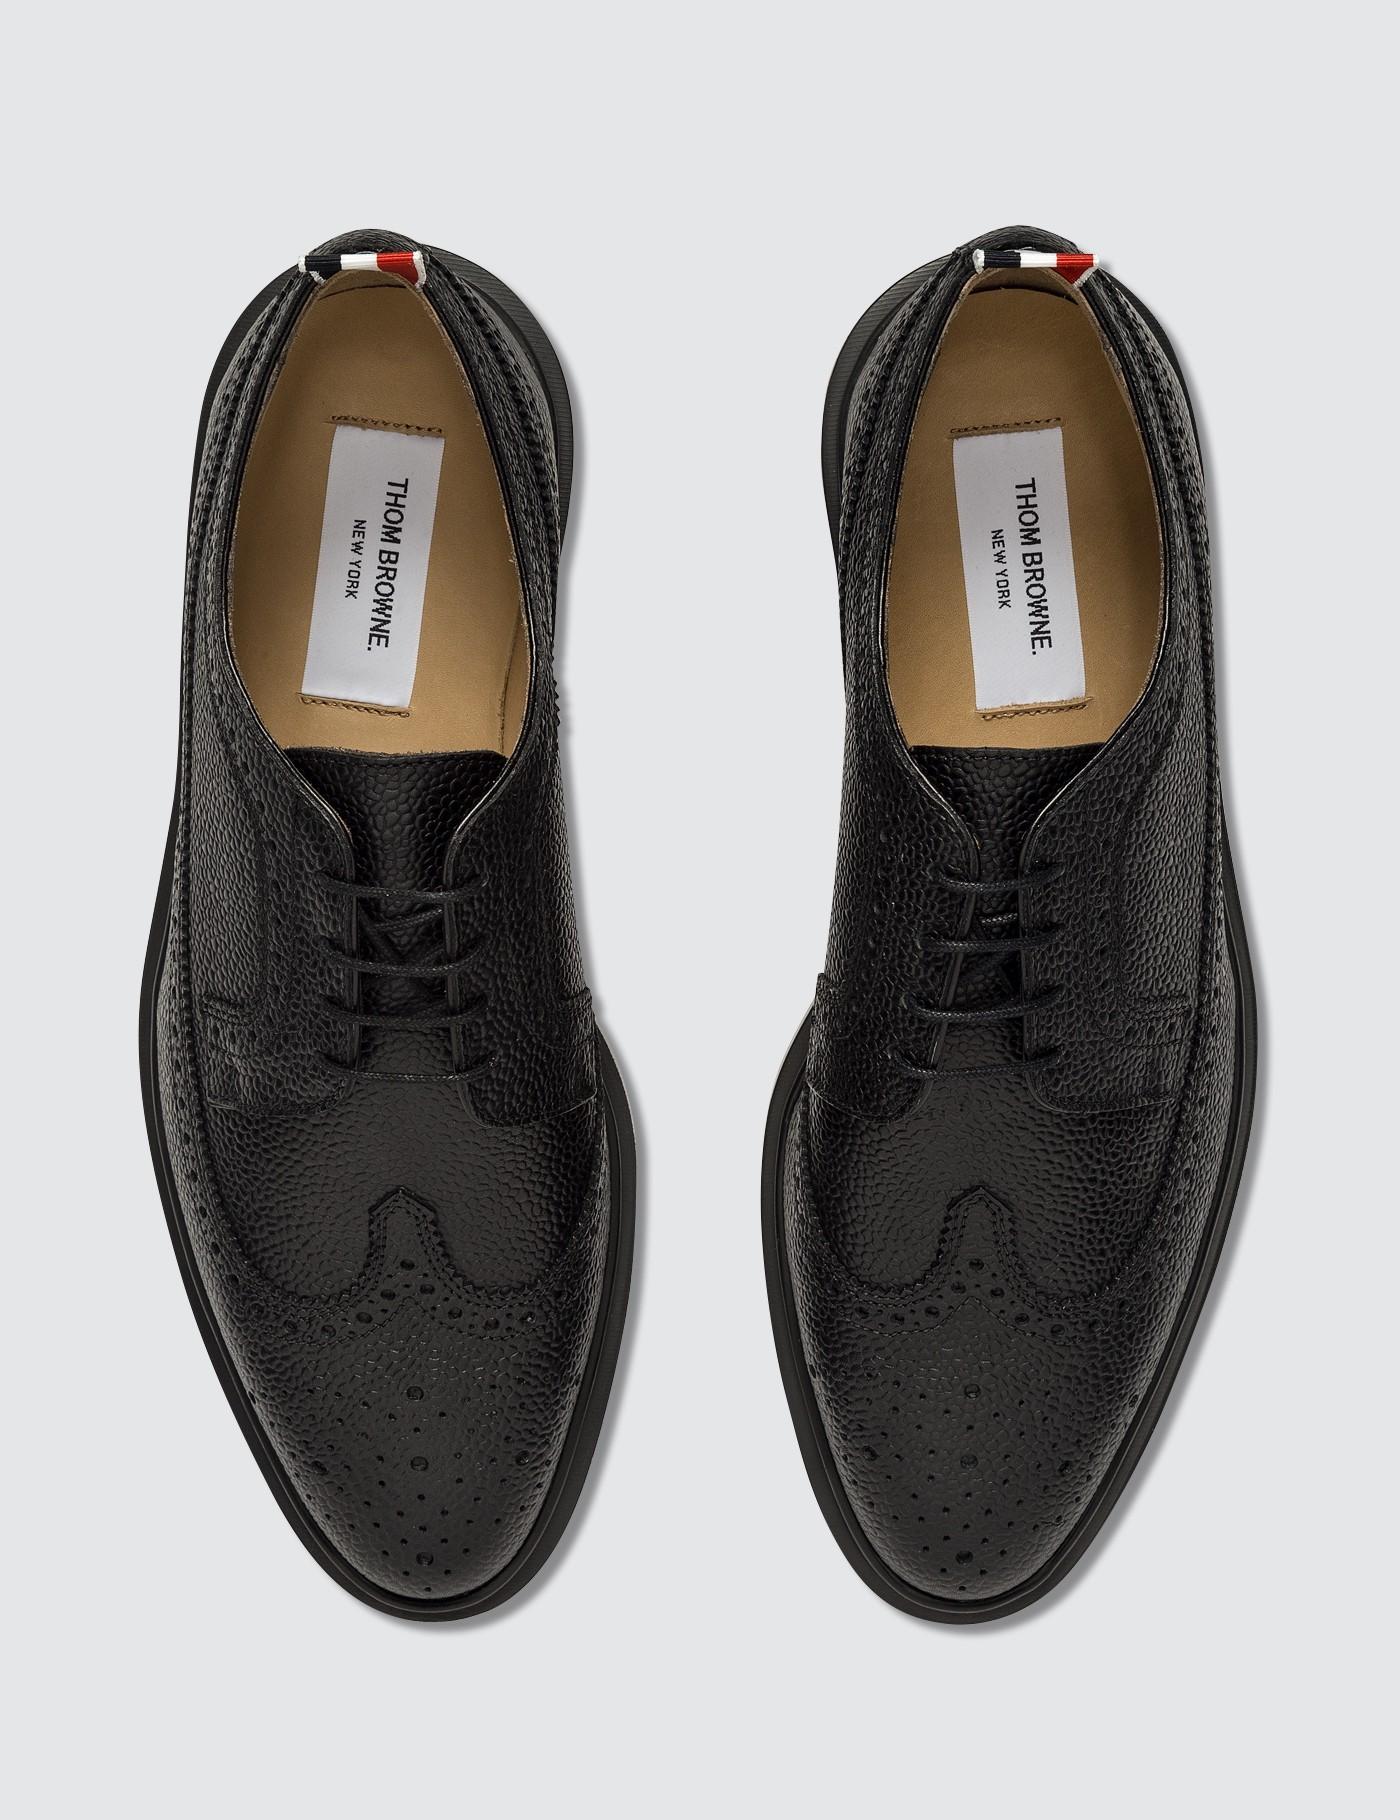 Thom Browne Leather Classic Longwing Brogues in Black for Men - Lyst